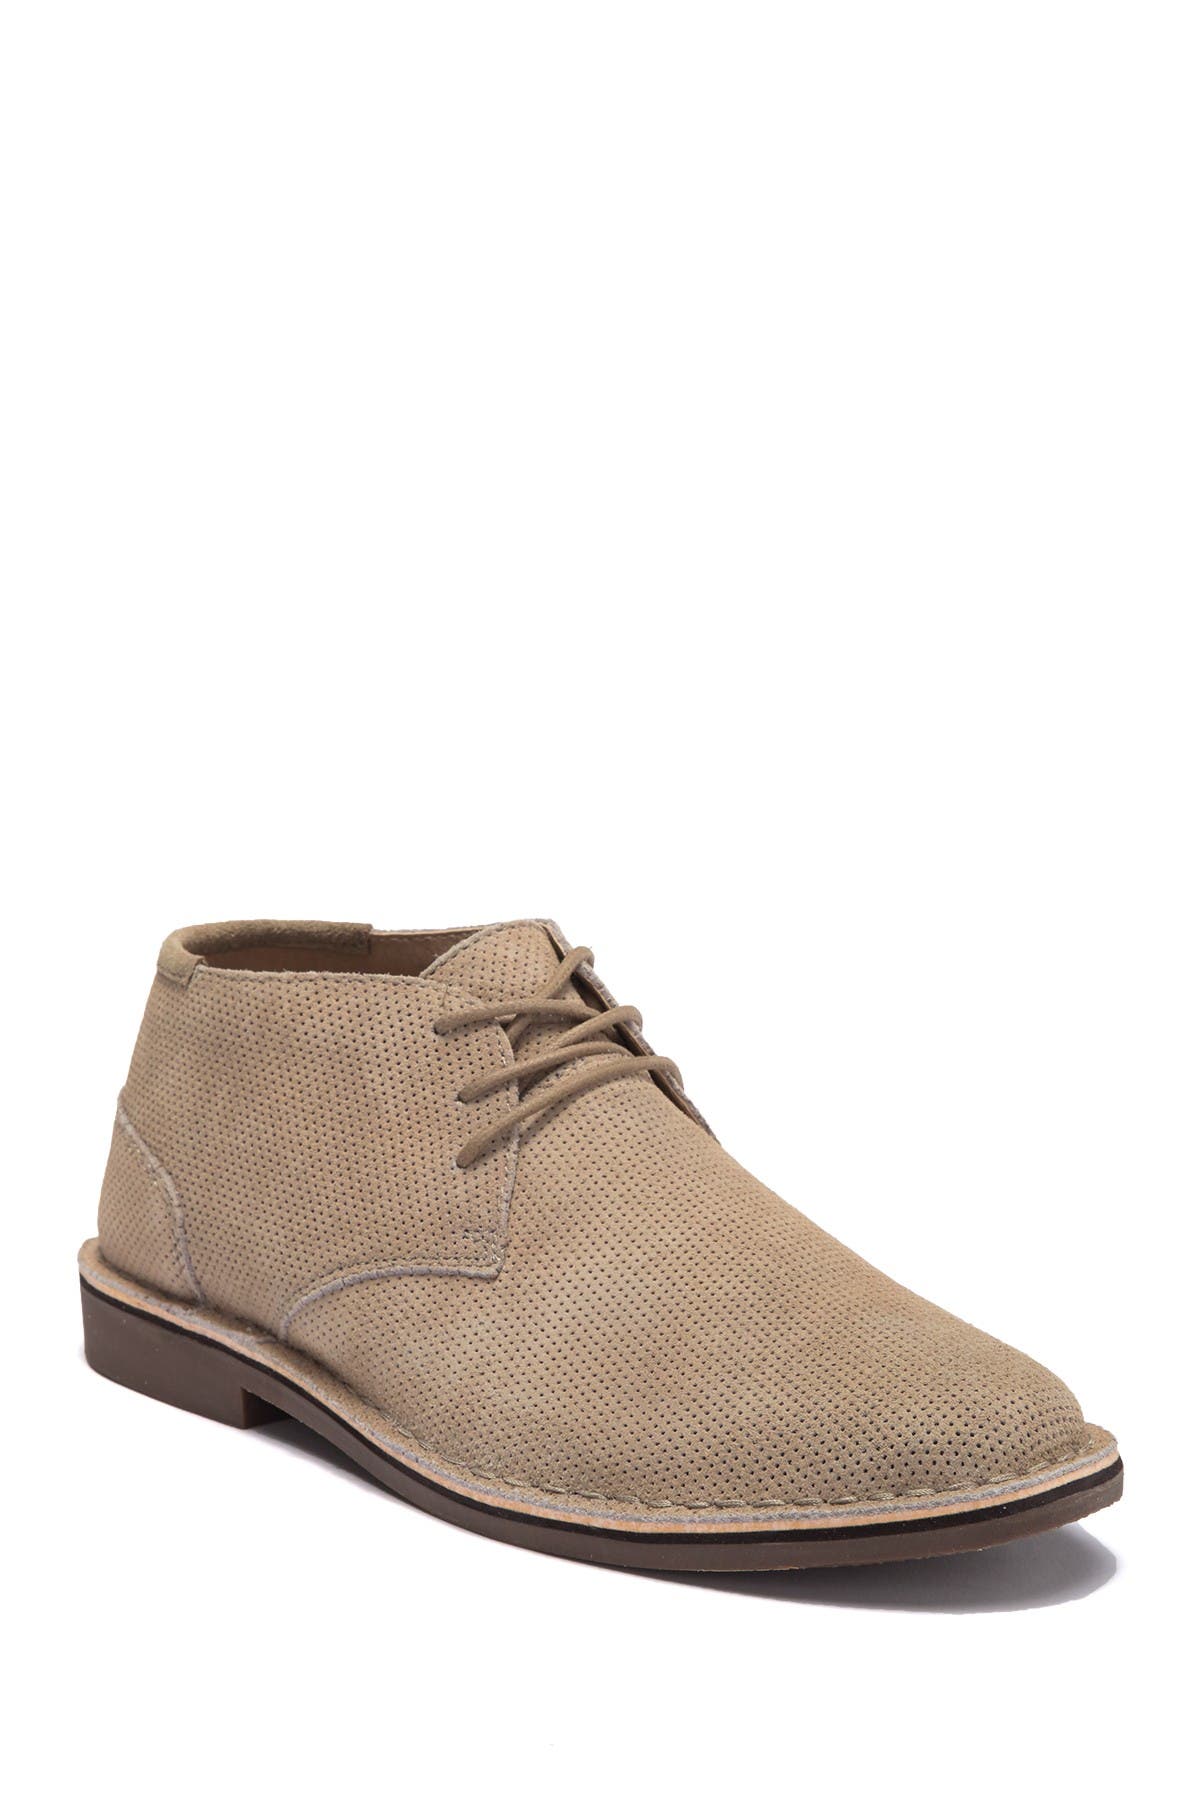 Kenneth Cole Reaction | Desert Suede 